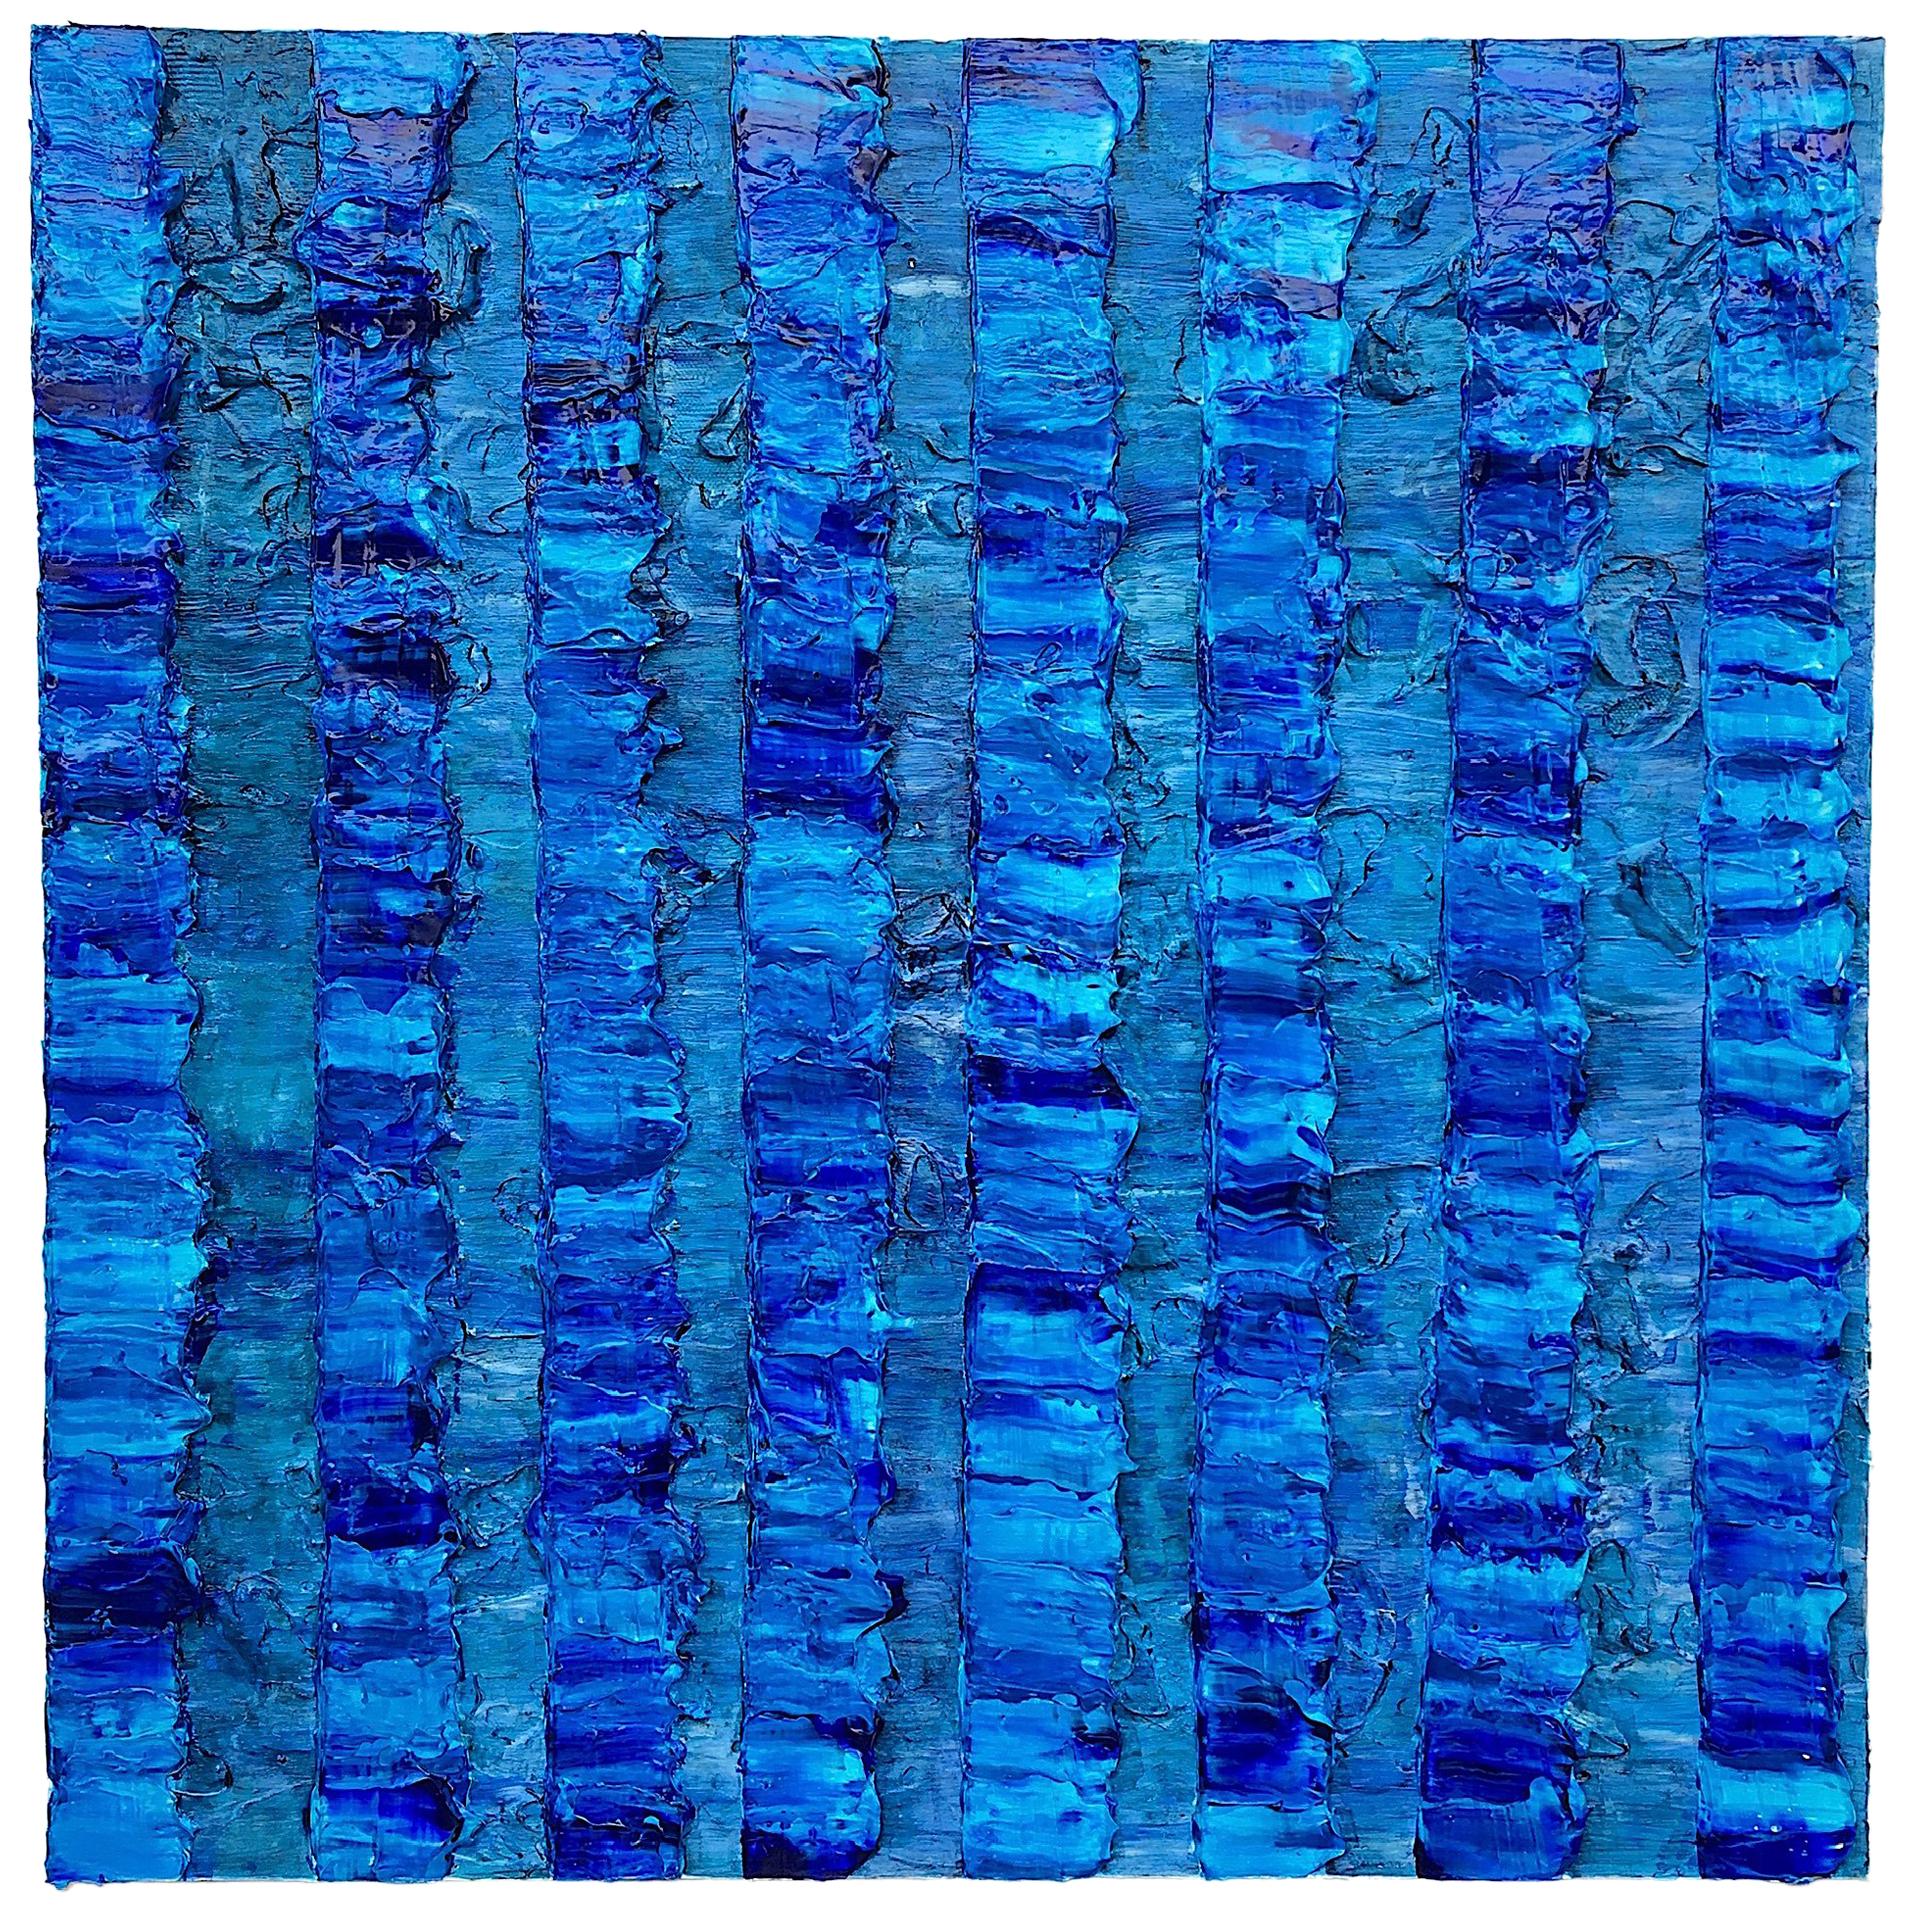 Painting Marina 9 by Liora Textured Square Blue Abstract Canvas Contemporary  For Sale